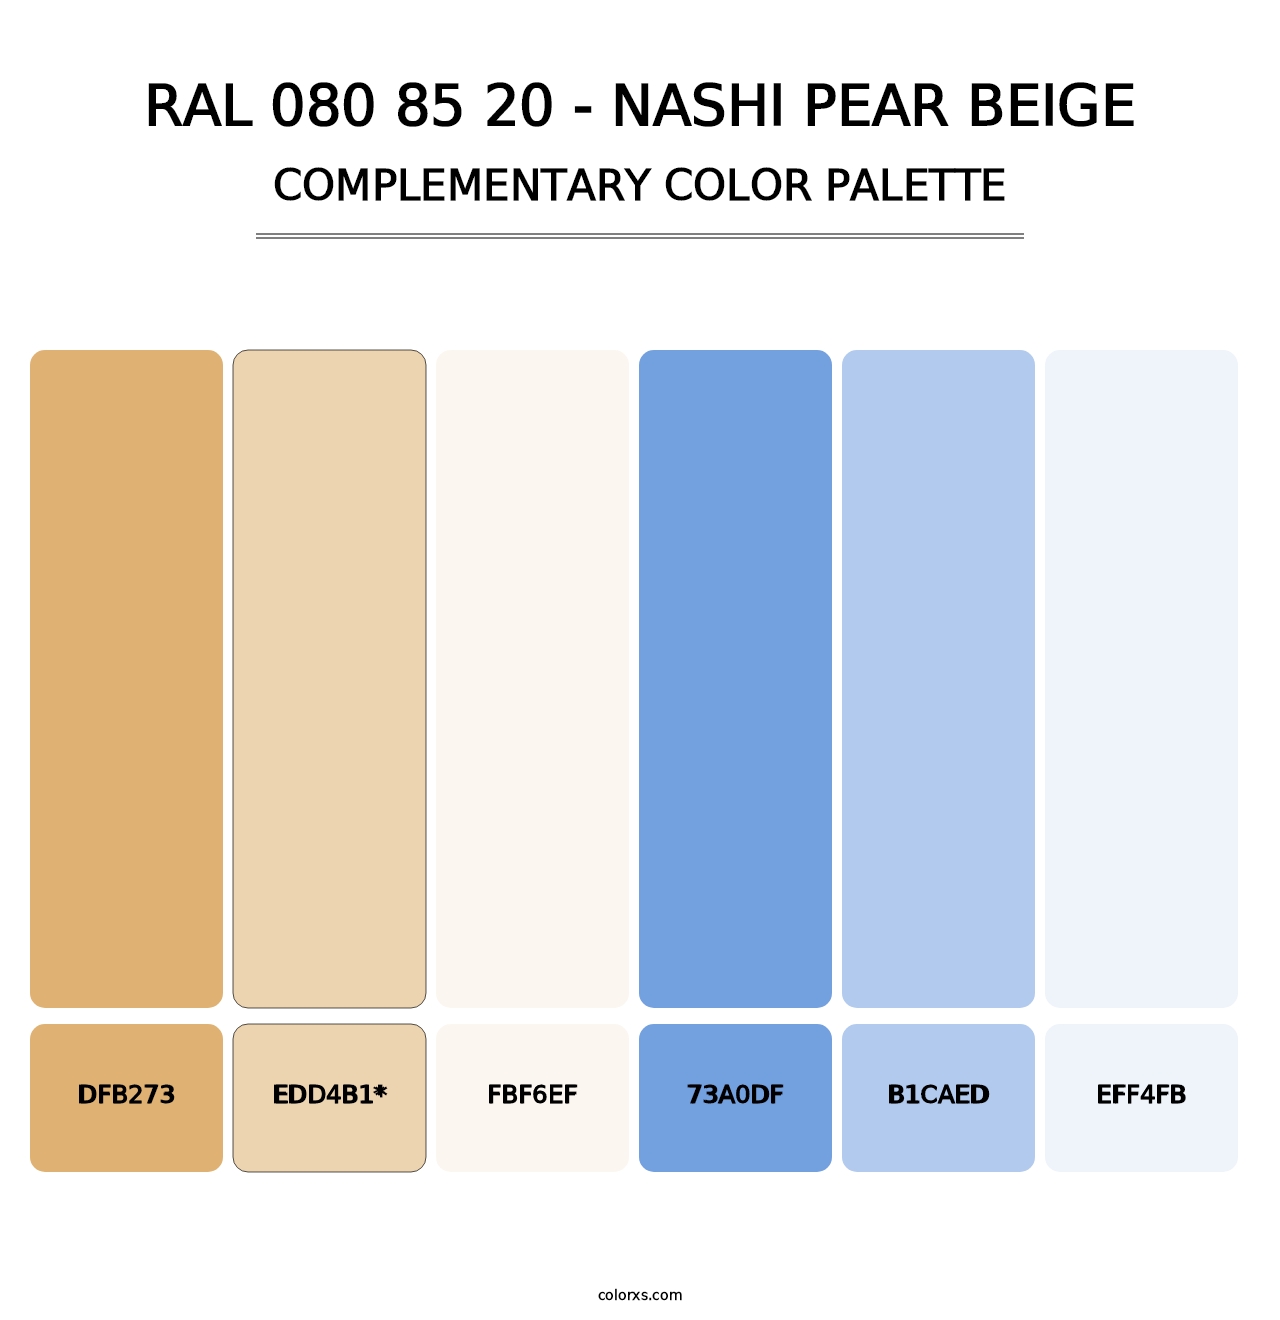 RAL 080 85 20 - Nashi Pear Beige - Complementary Color Palette